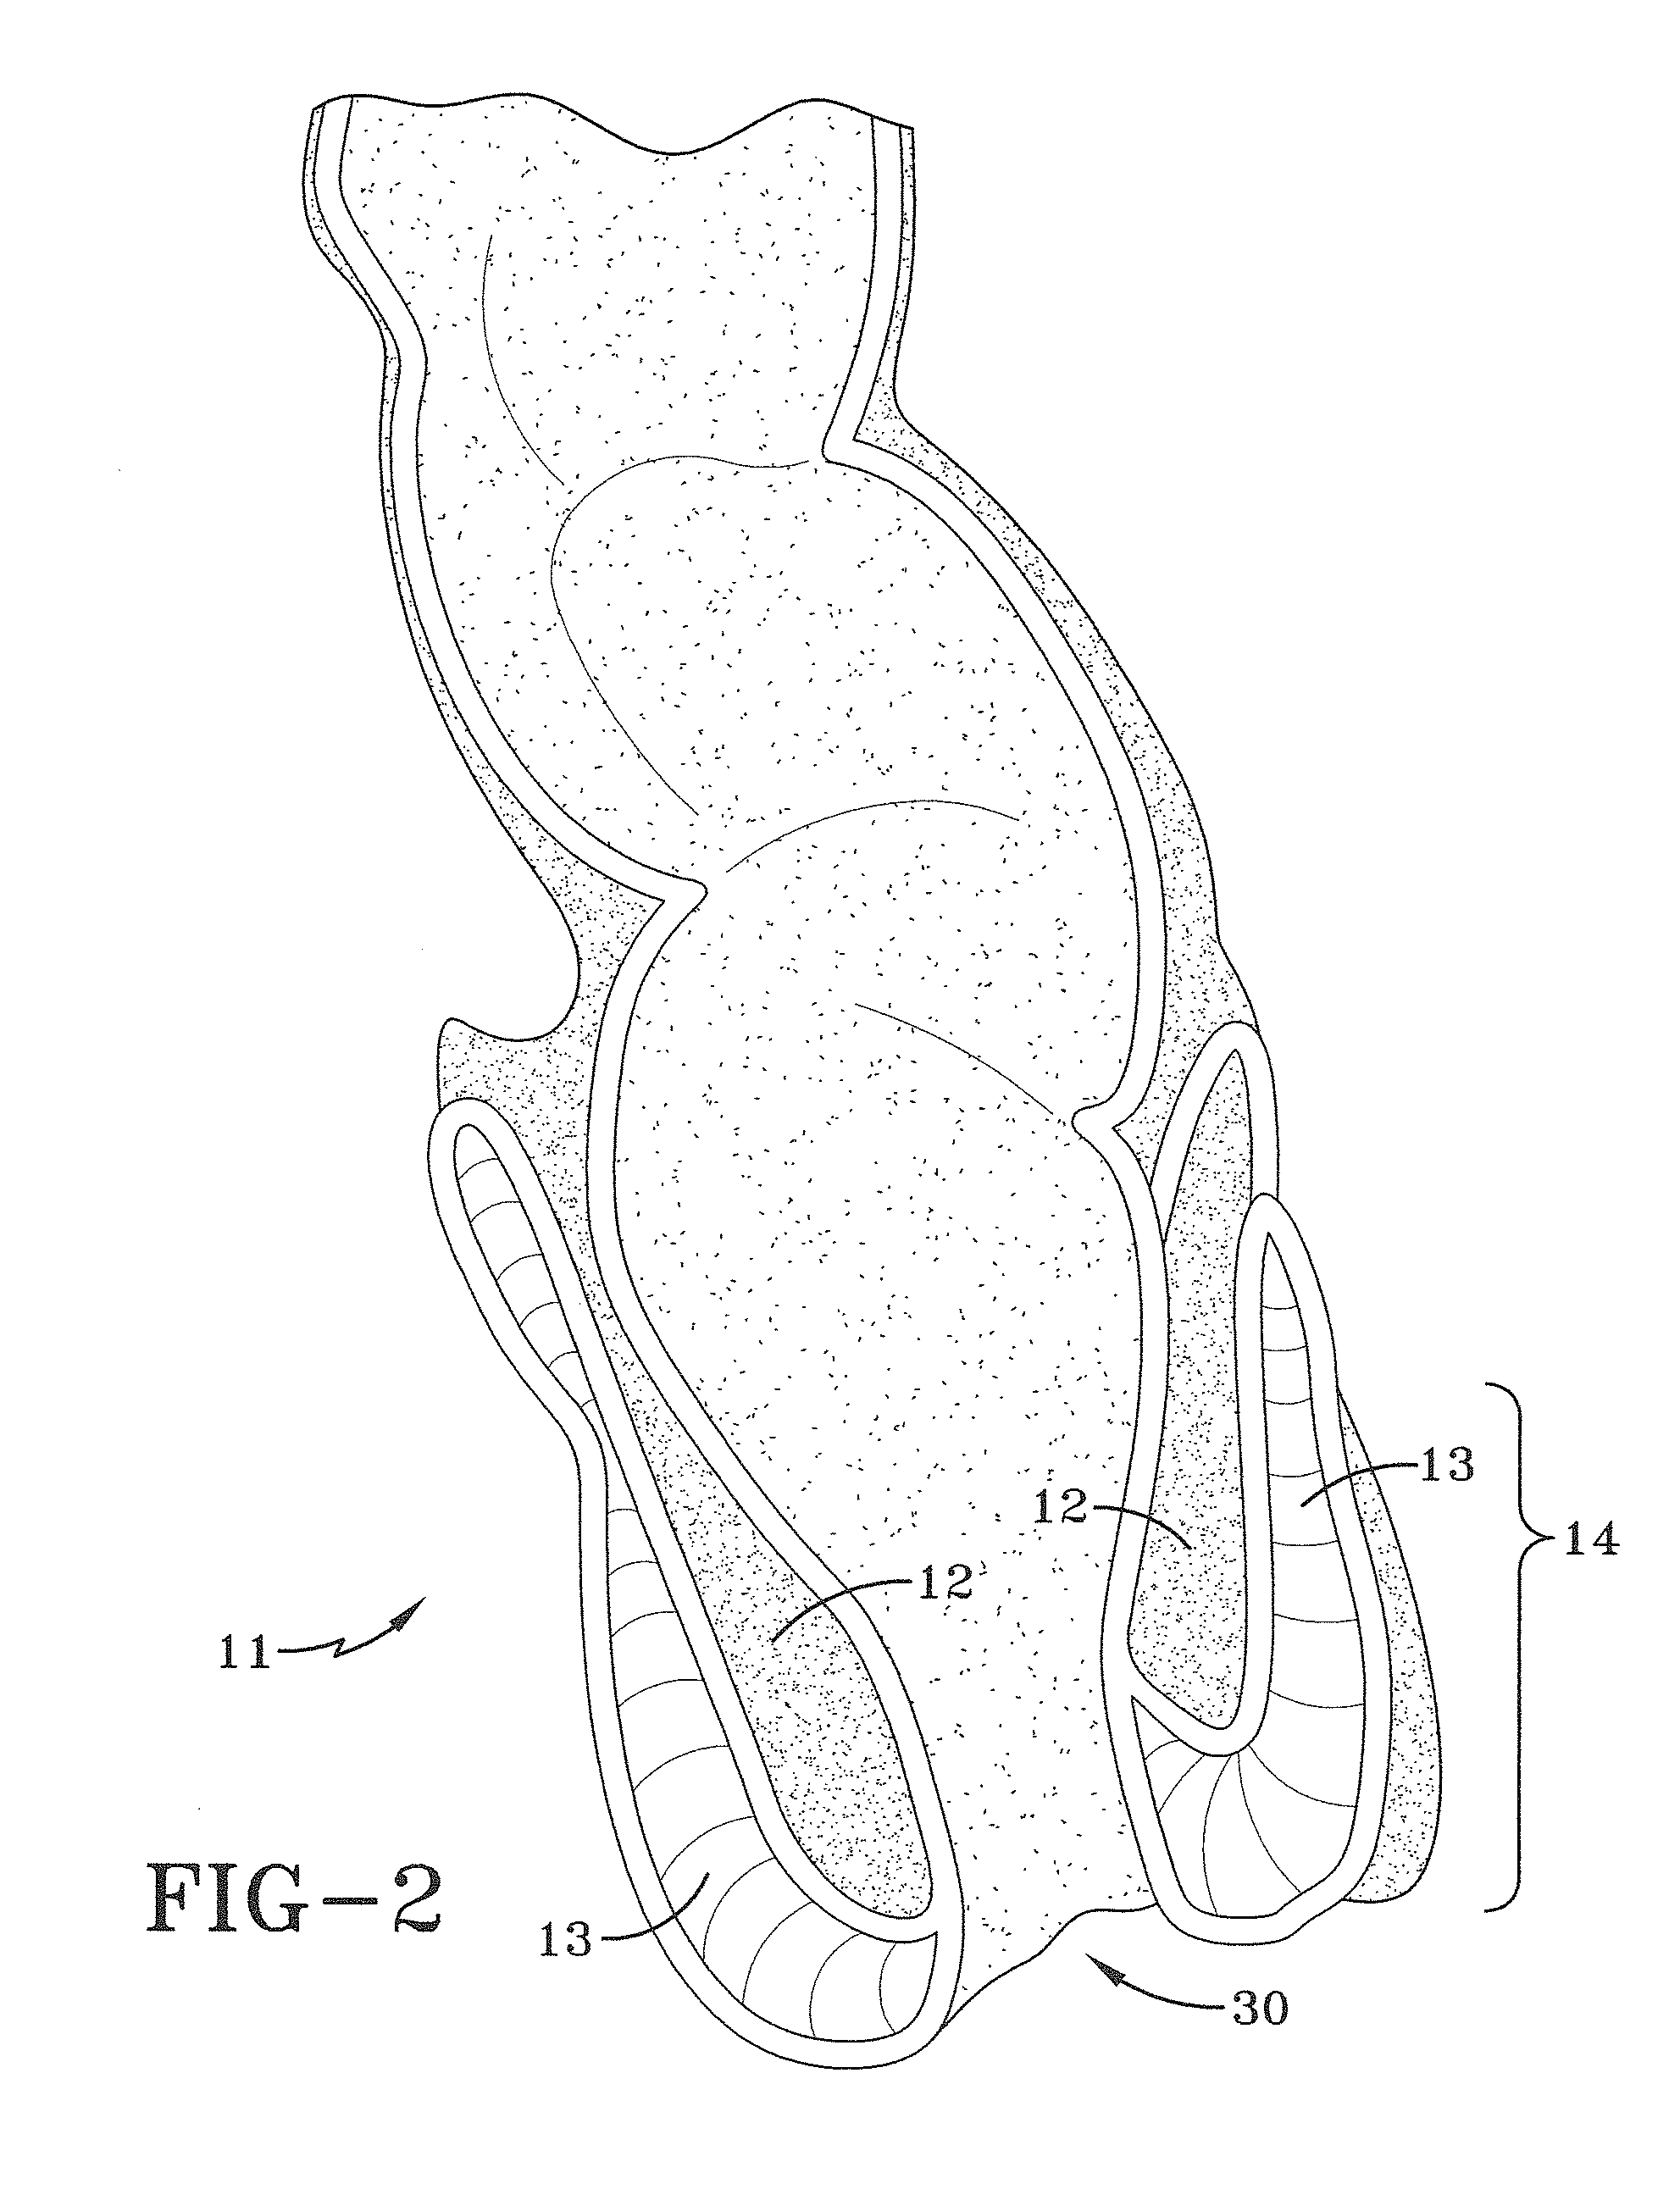 Orifice probe apparatus and a method of use thereof